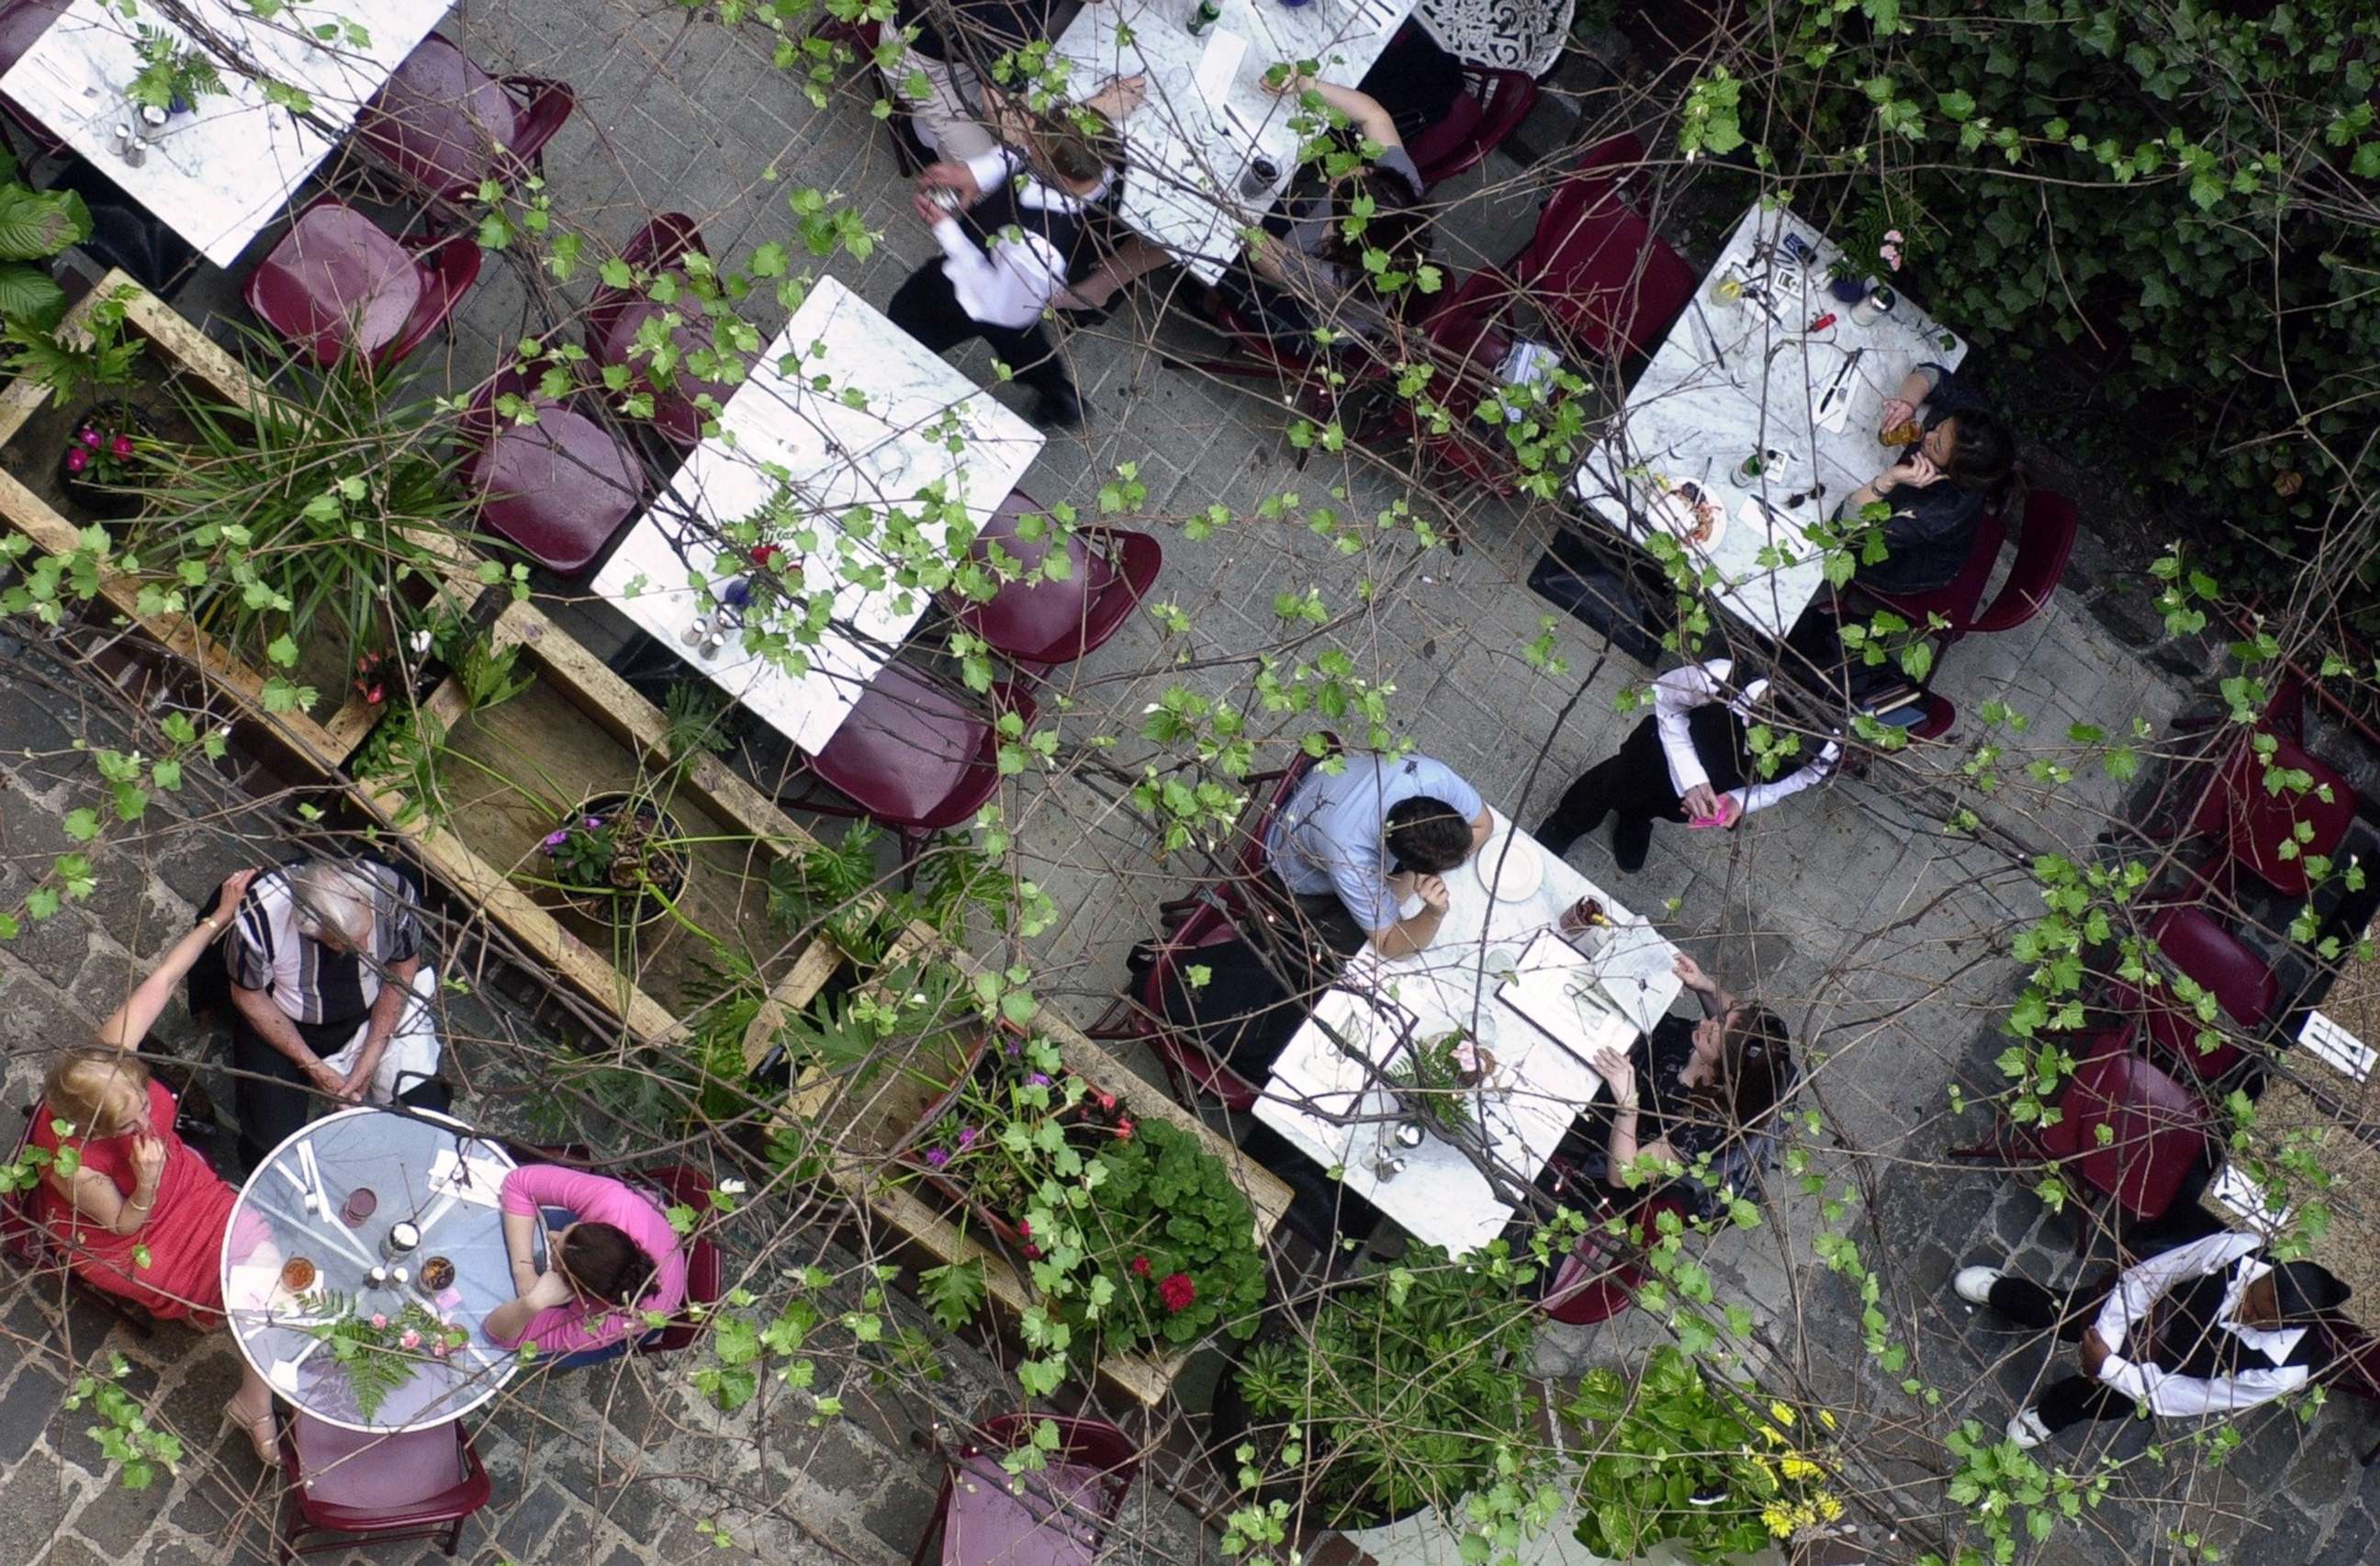 PHOTO: Patrons dine in the courtyard of the Cloister Cafe in the East Village of New York in an undated photo.